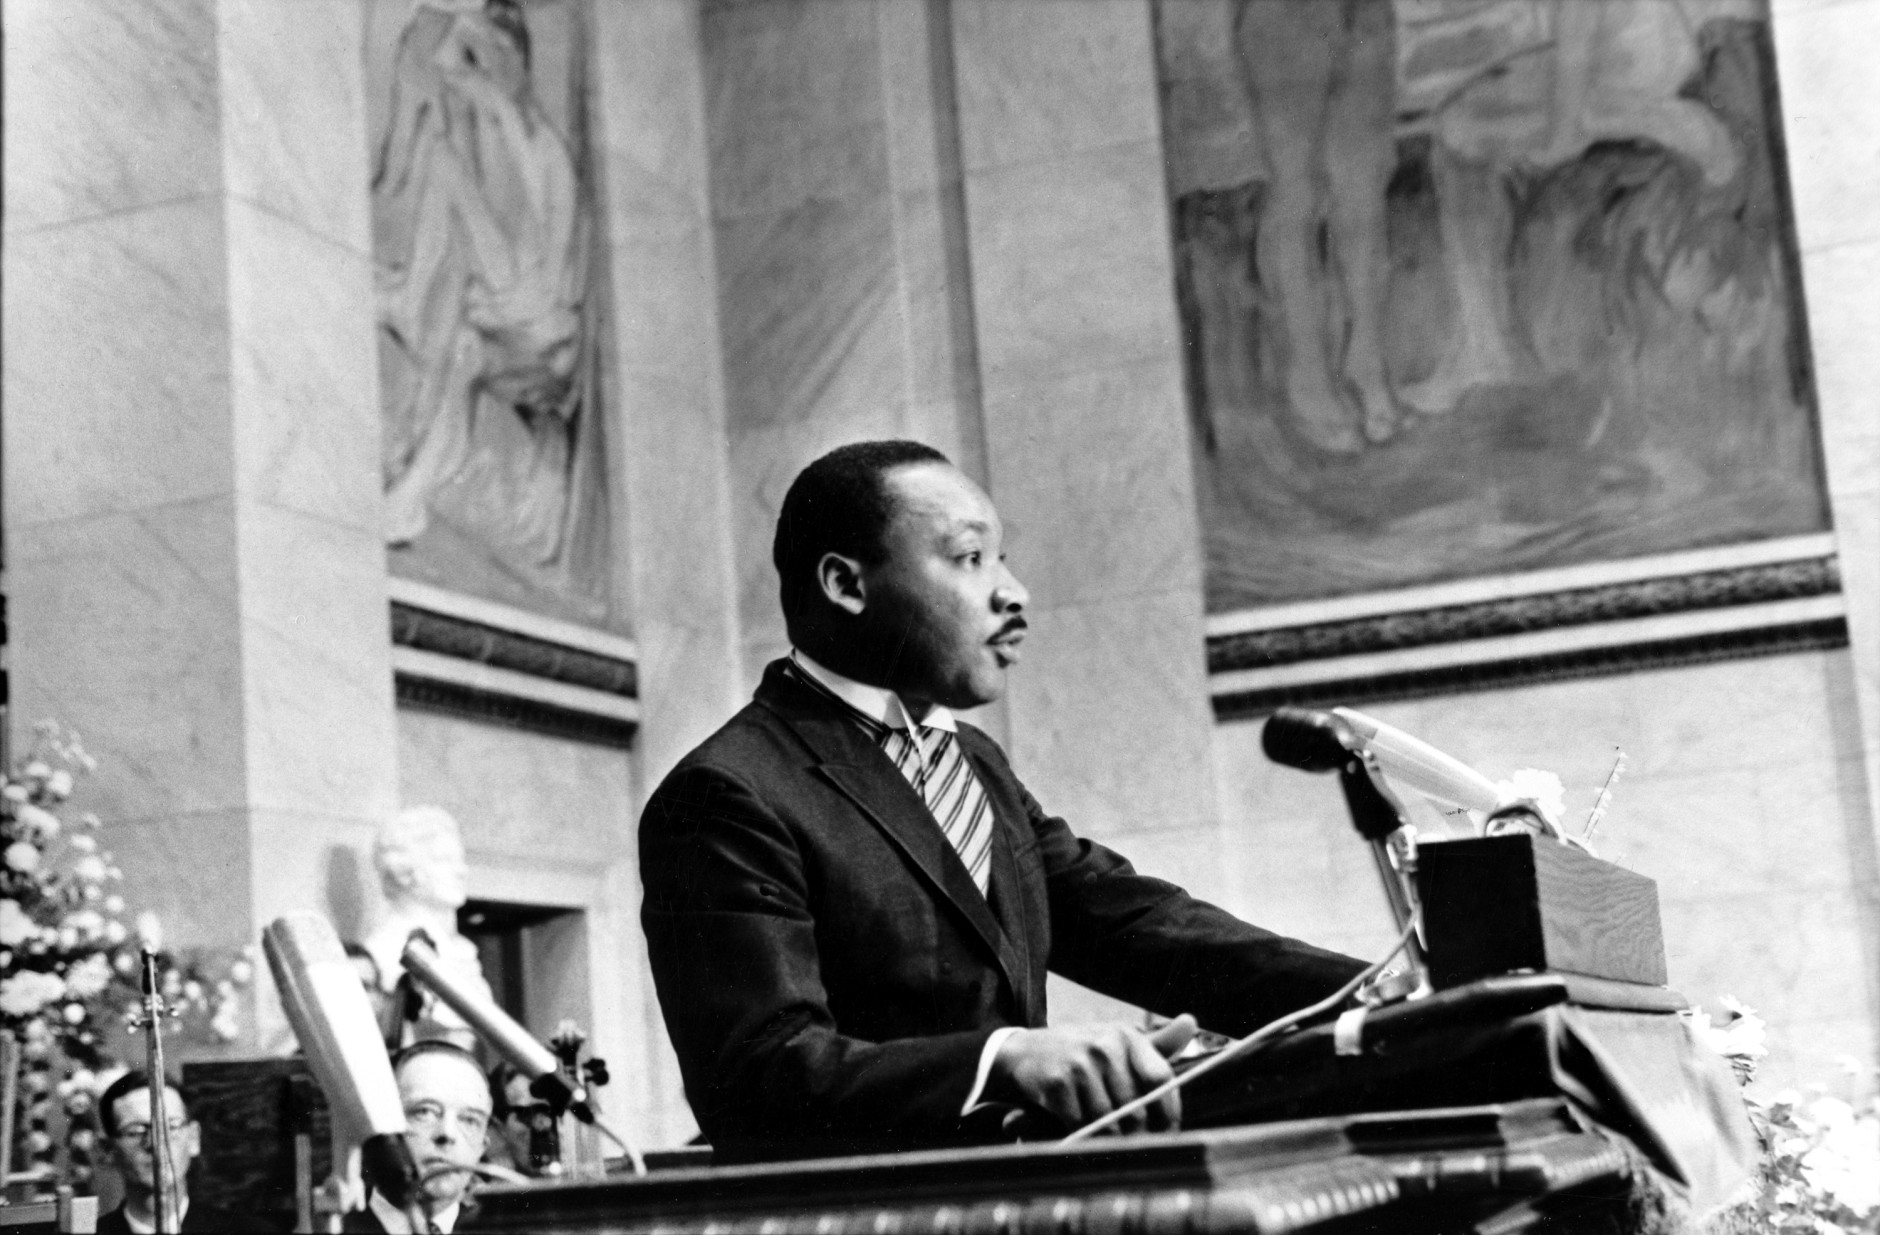 The Rev. Martin Luther King Jr., delivers his Nobel Peace Prize acceptance speech in the auditorium of Oslo University in Norway on Dec. 10, 1964.  King, the youngest person to receive the Nobel Peace prize, is recognized for his leadership in the American civil rights movement and for advocating non violence.  (AP Photo)